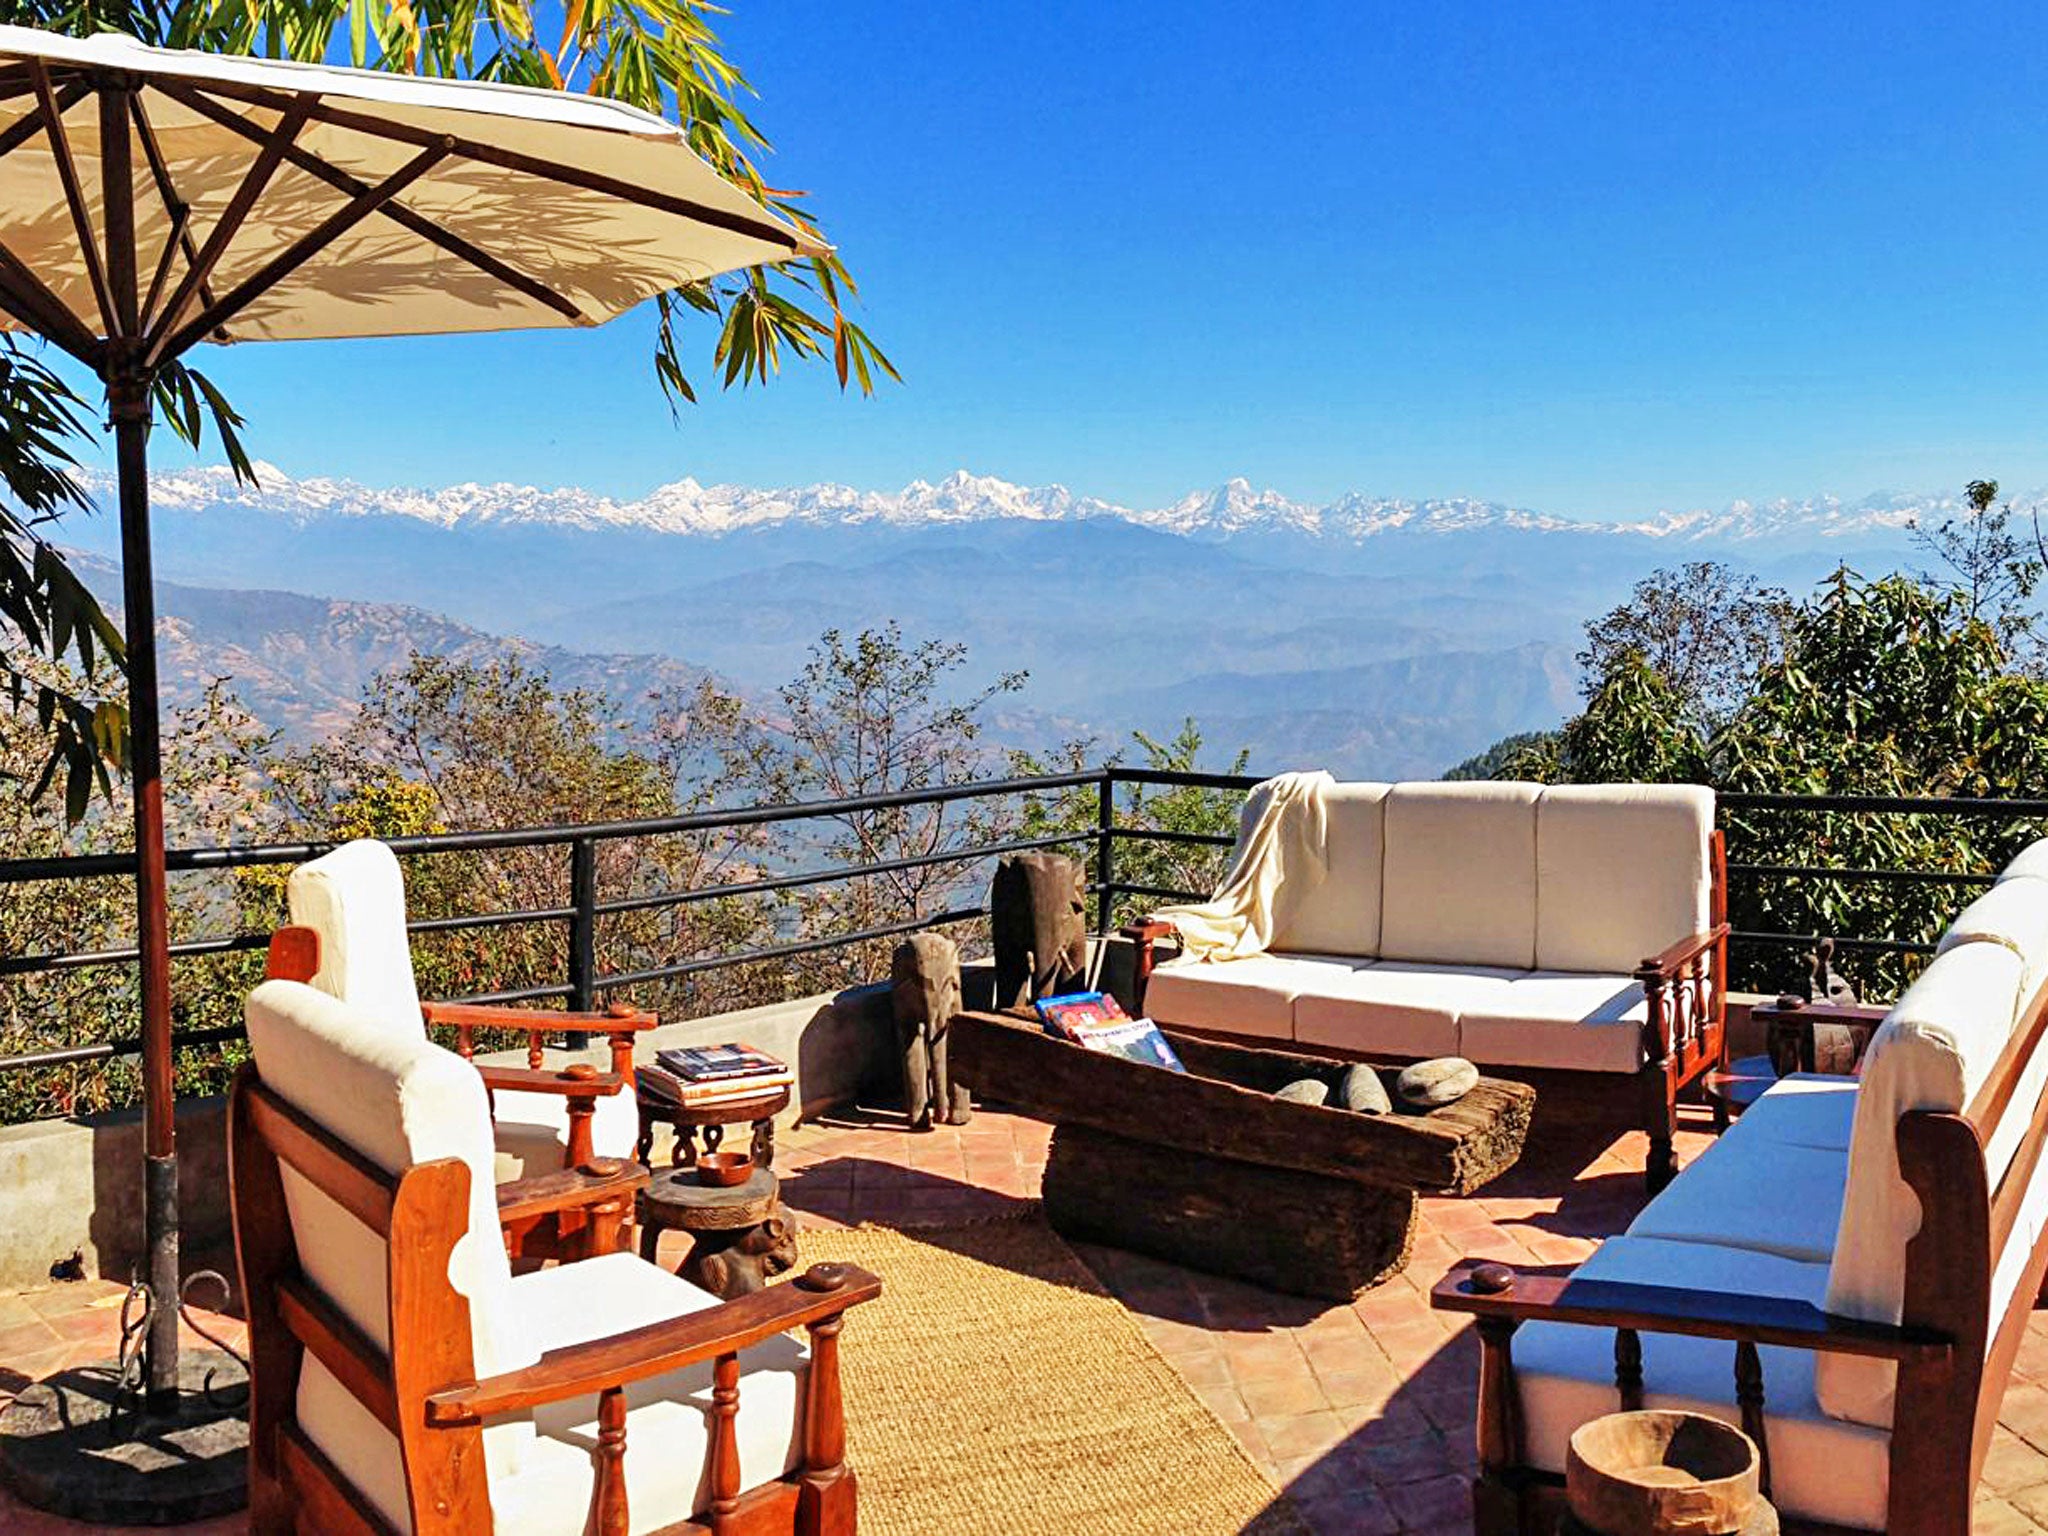 Dwarika's Resort, Nepal: In the 1950s, conservationist Dwarika Das Shrestha took over a collection of heritage houses in Kathmandu and spent 30 years turning them into a five-star hotel.